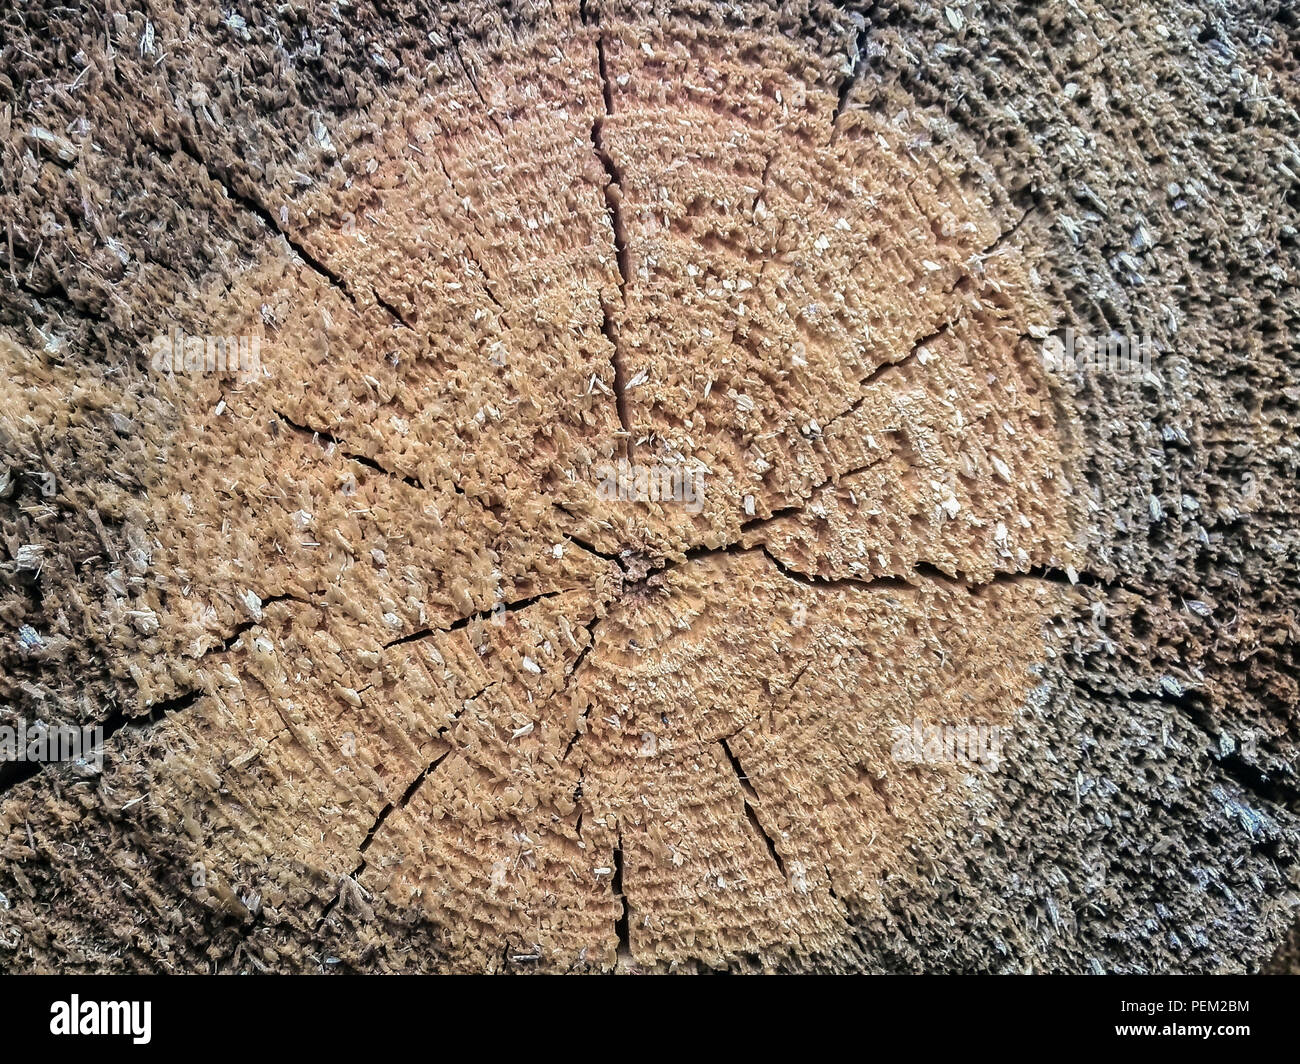 Closeup macro view of split cross cut section of a wooden log. Natural organic texture, pattern,  background of cracked, rough, wooden surface with an Stock Photo